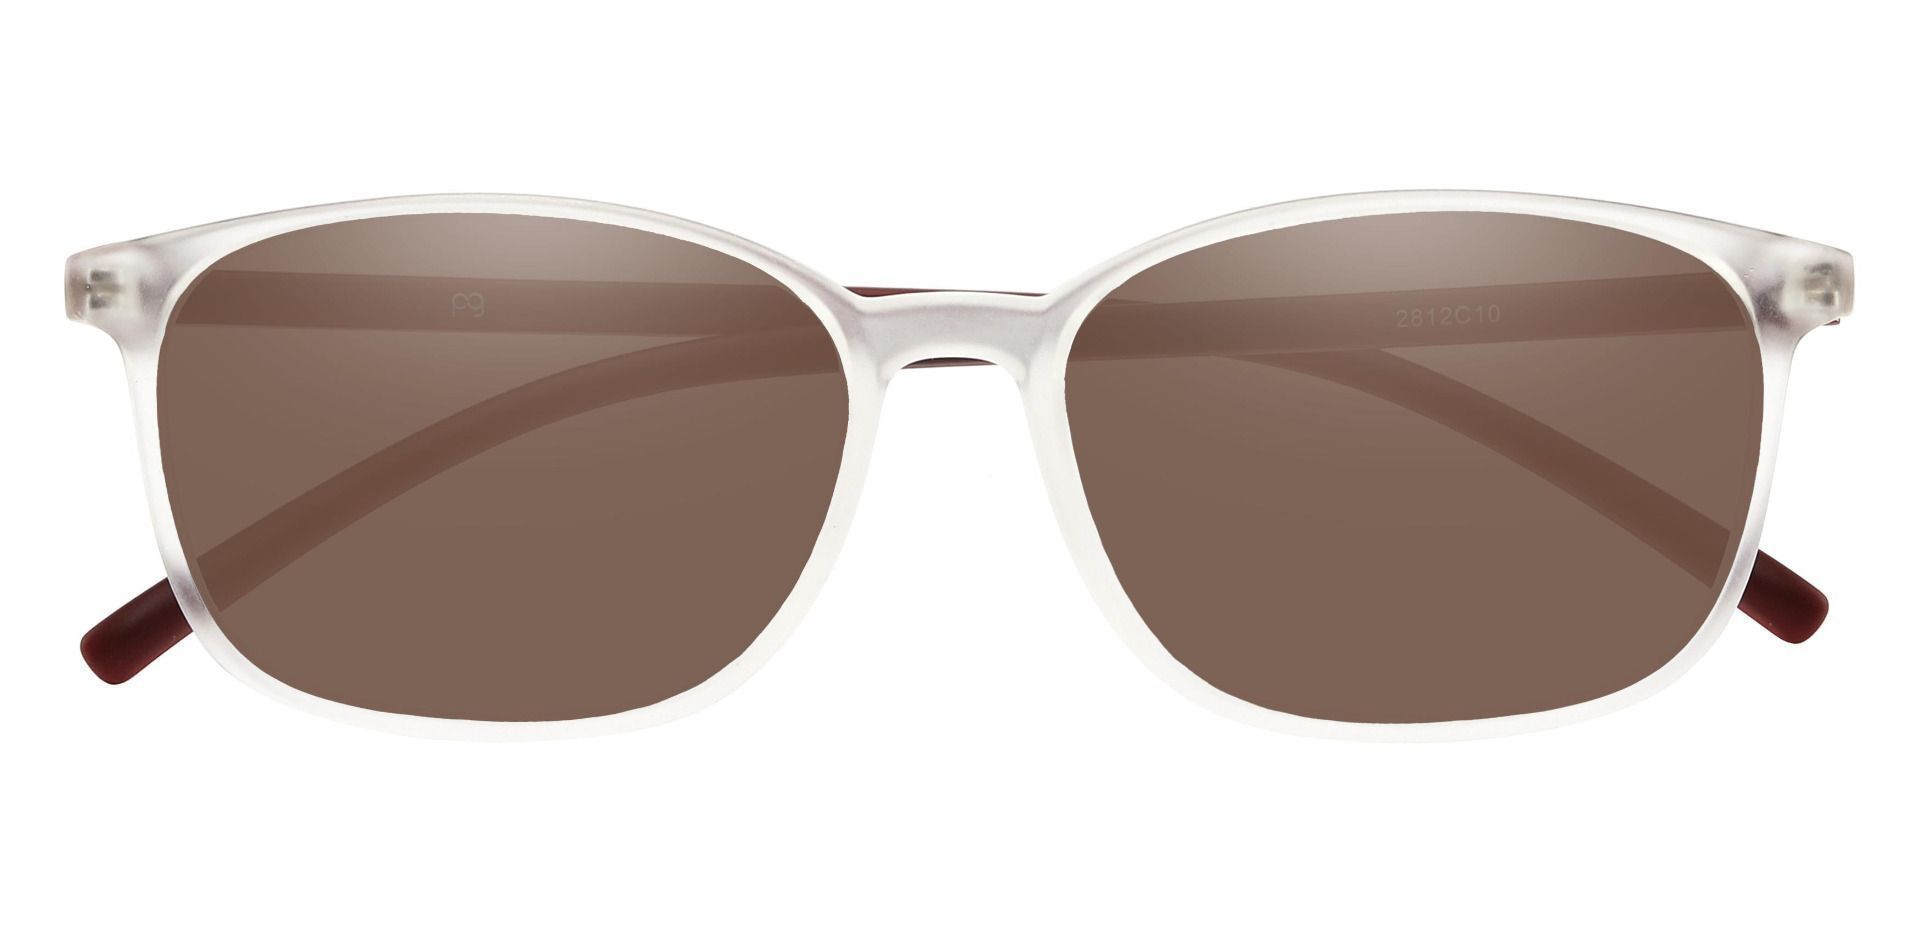 Onyx Square Prescription Sunglasses - Clear Frame With Brown Lenses